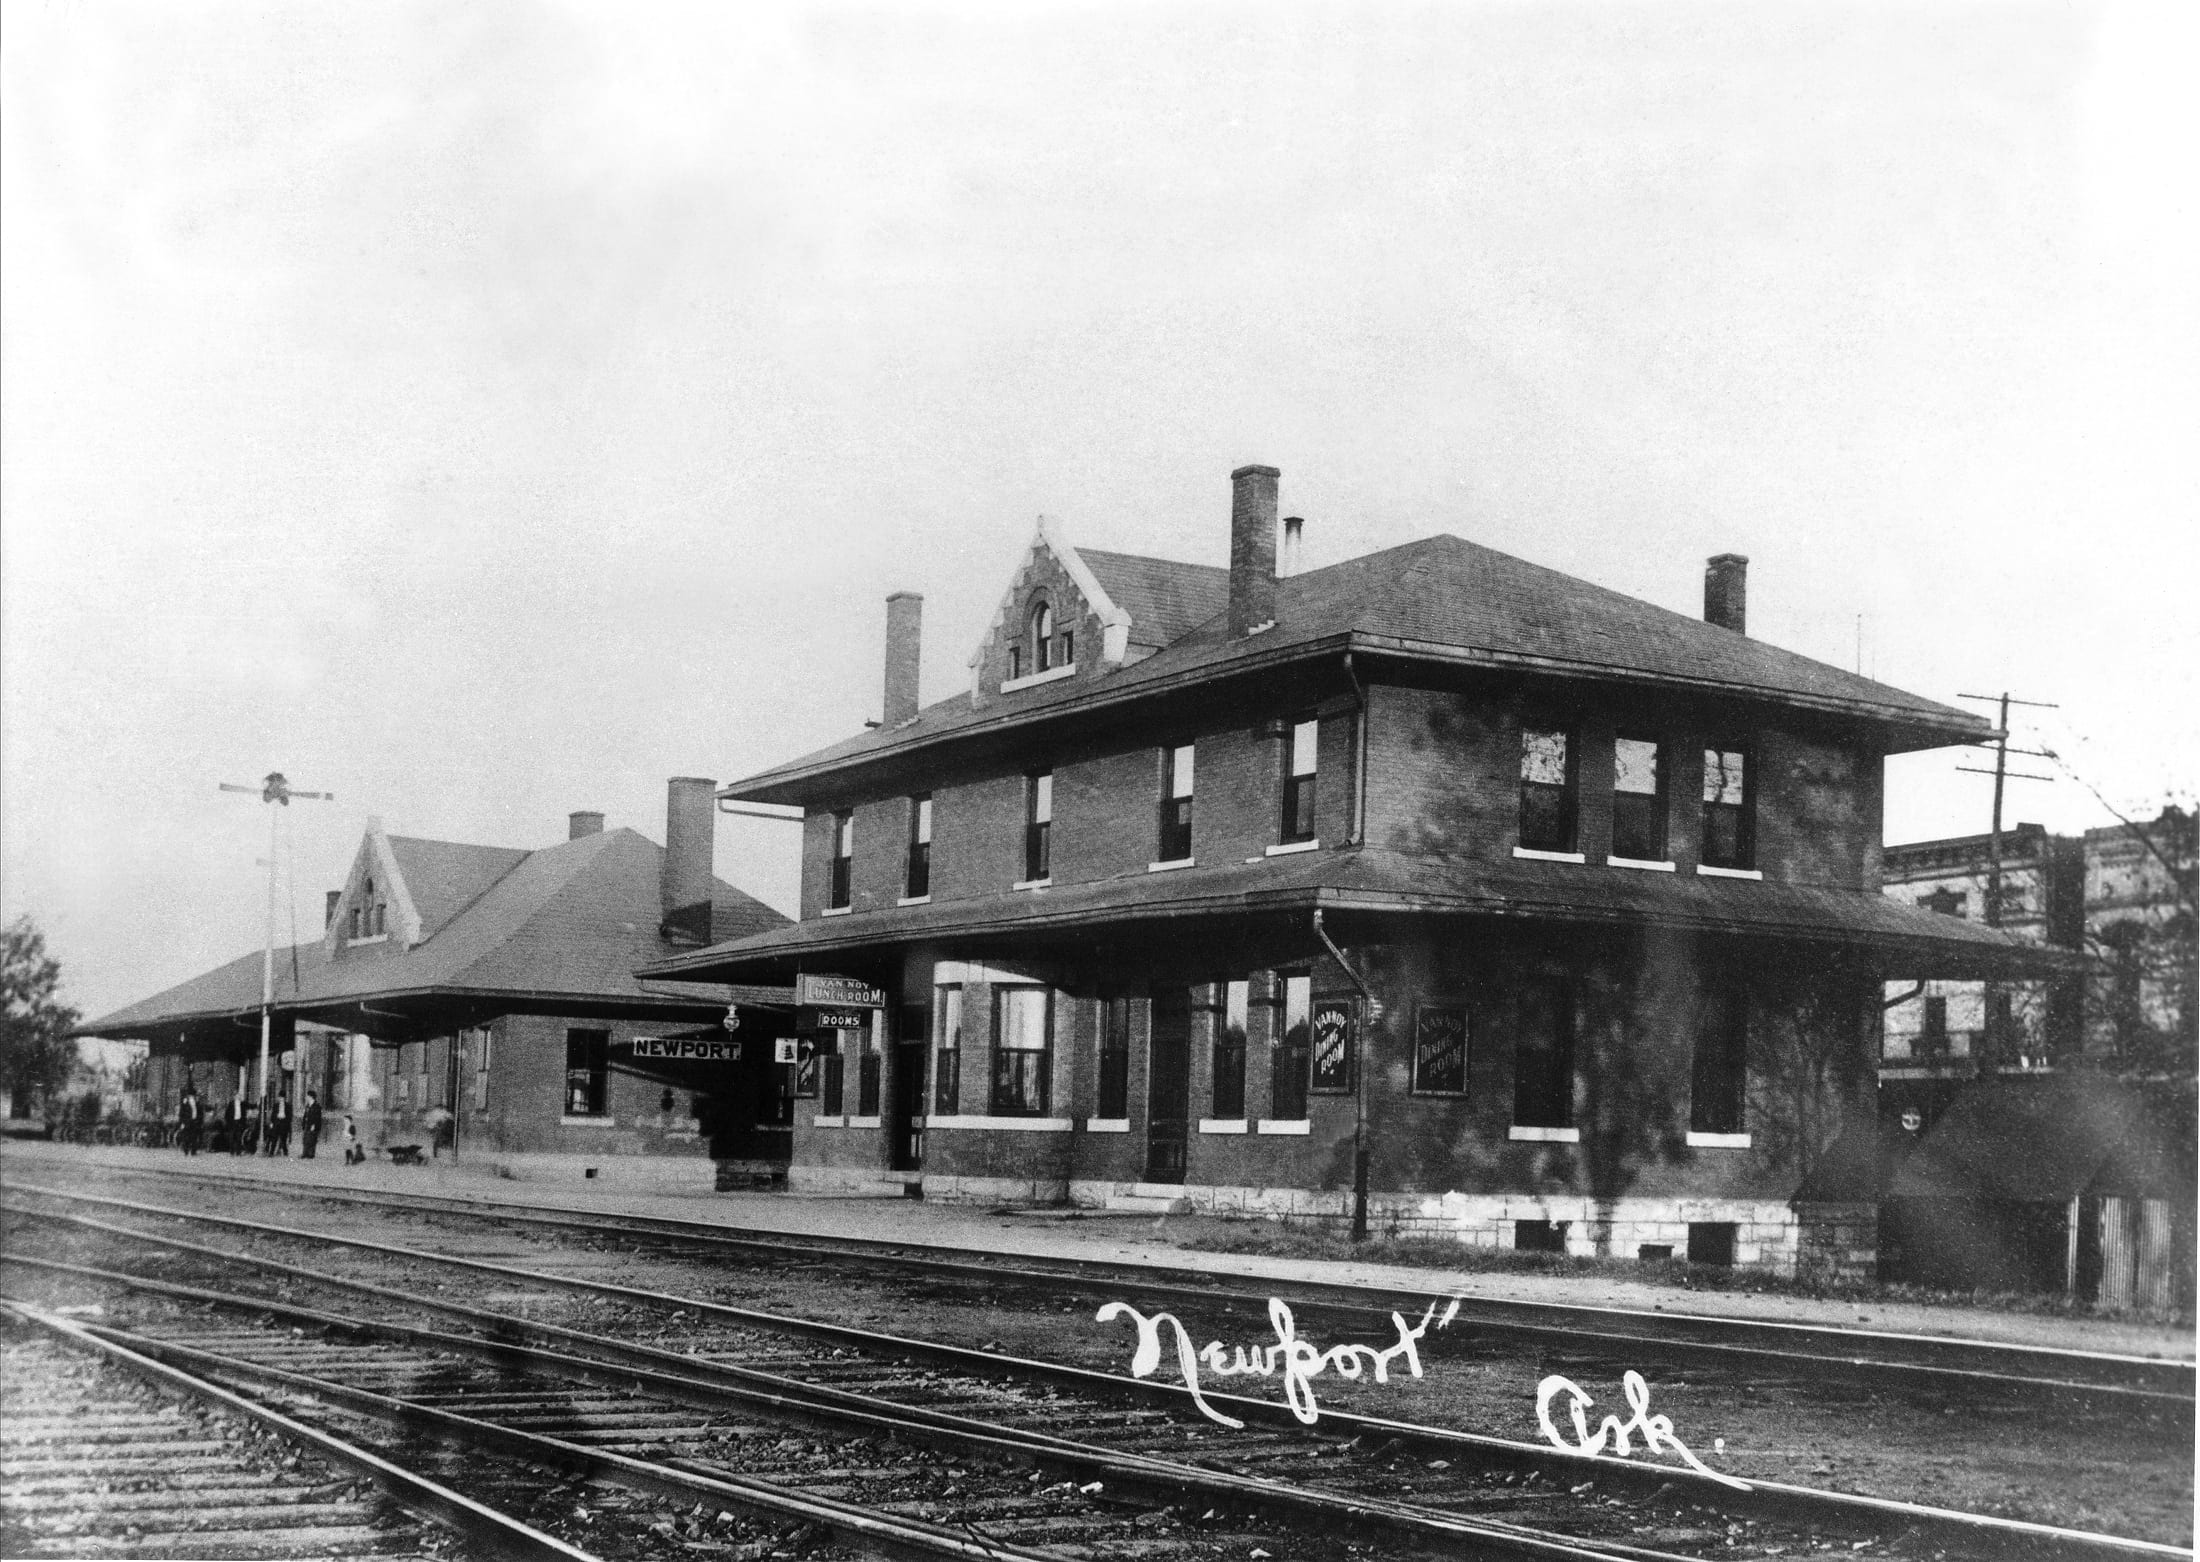 1916 – Depot and Van Nuys Hotel and Restaurant in Downtown Newport